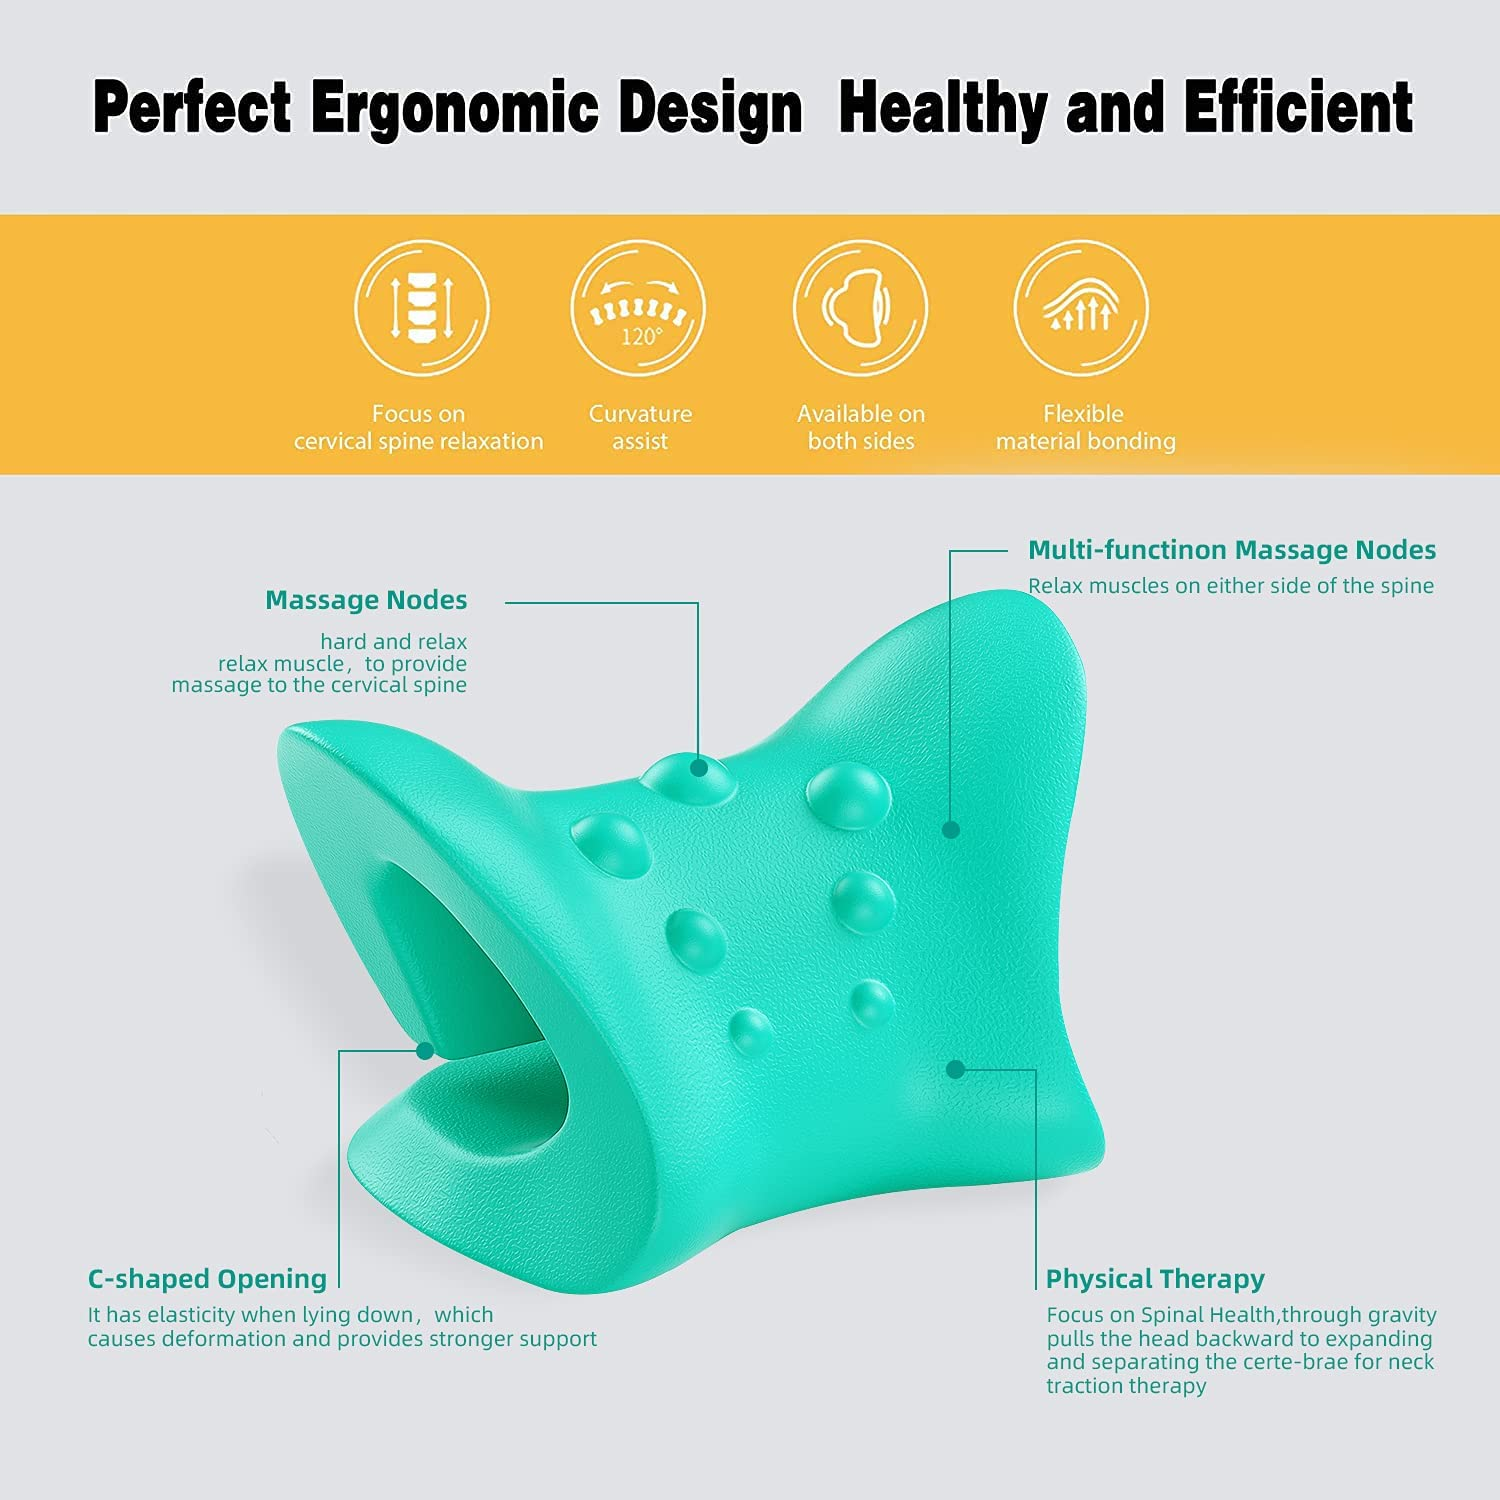 Neck and Shoulder Relaxer Cervical Neck Traction Device,Portable Chiropractic Pillow Neck Stretcher Neck Massage Pillow for Pain Relief Management and Cervical